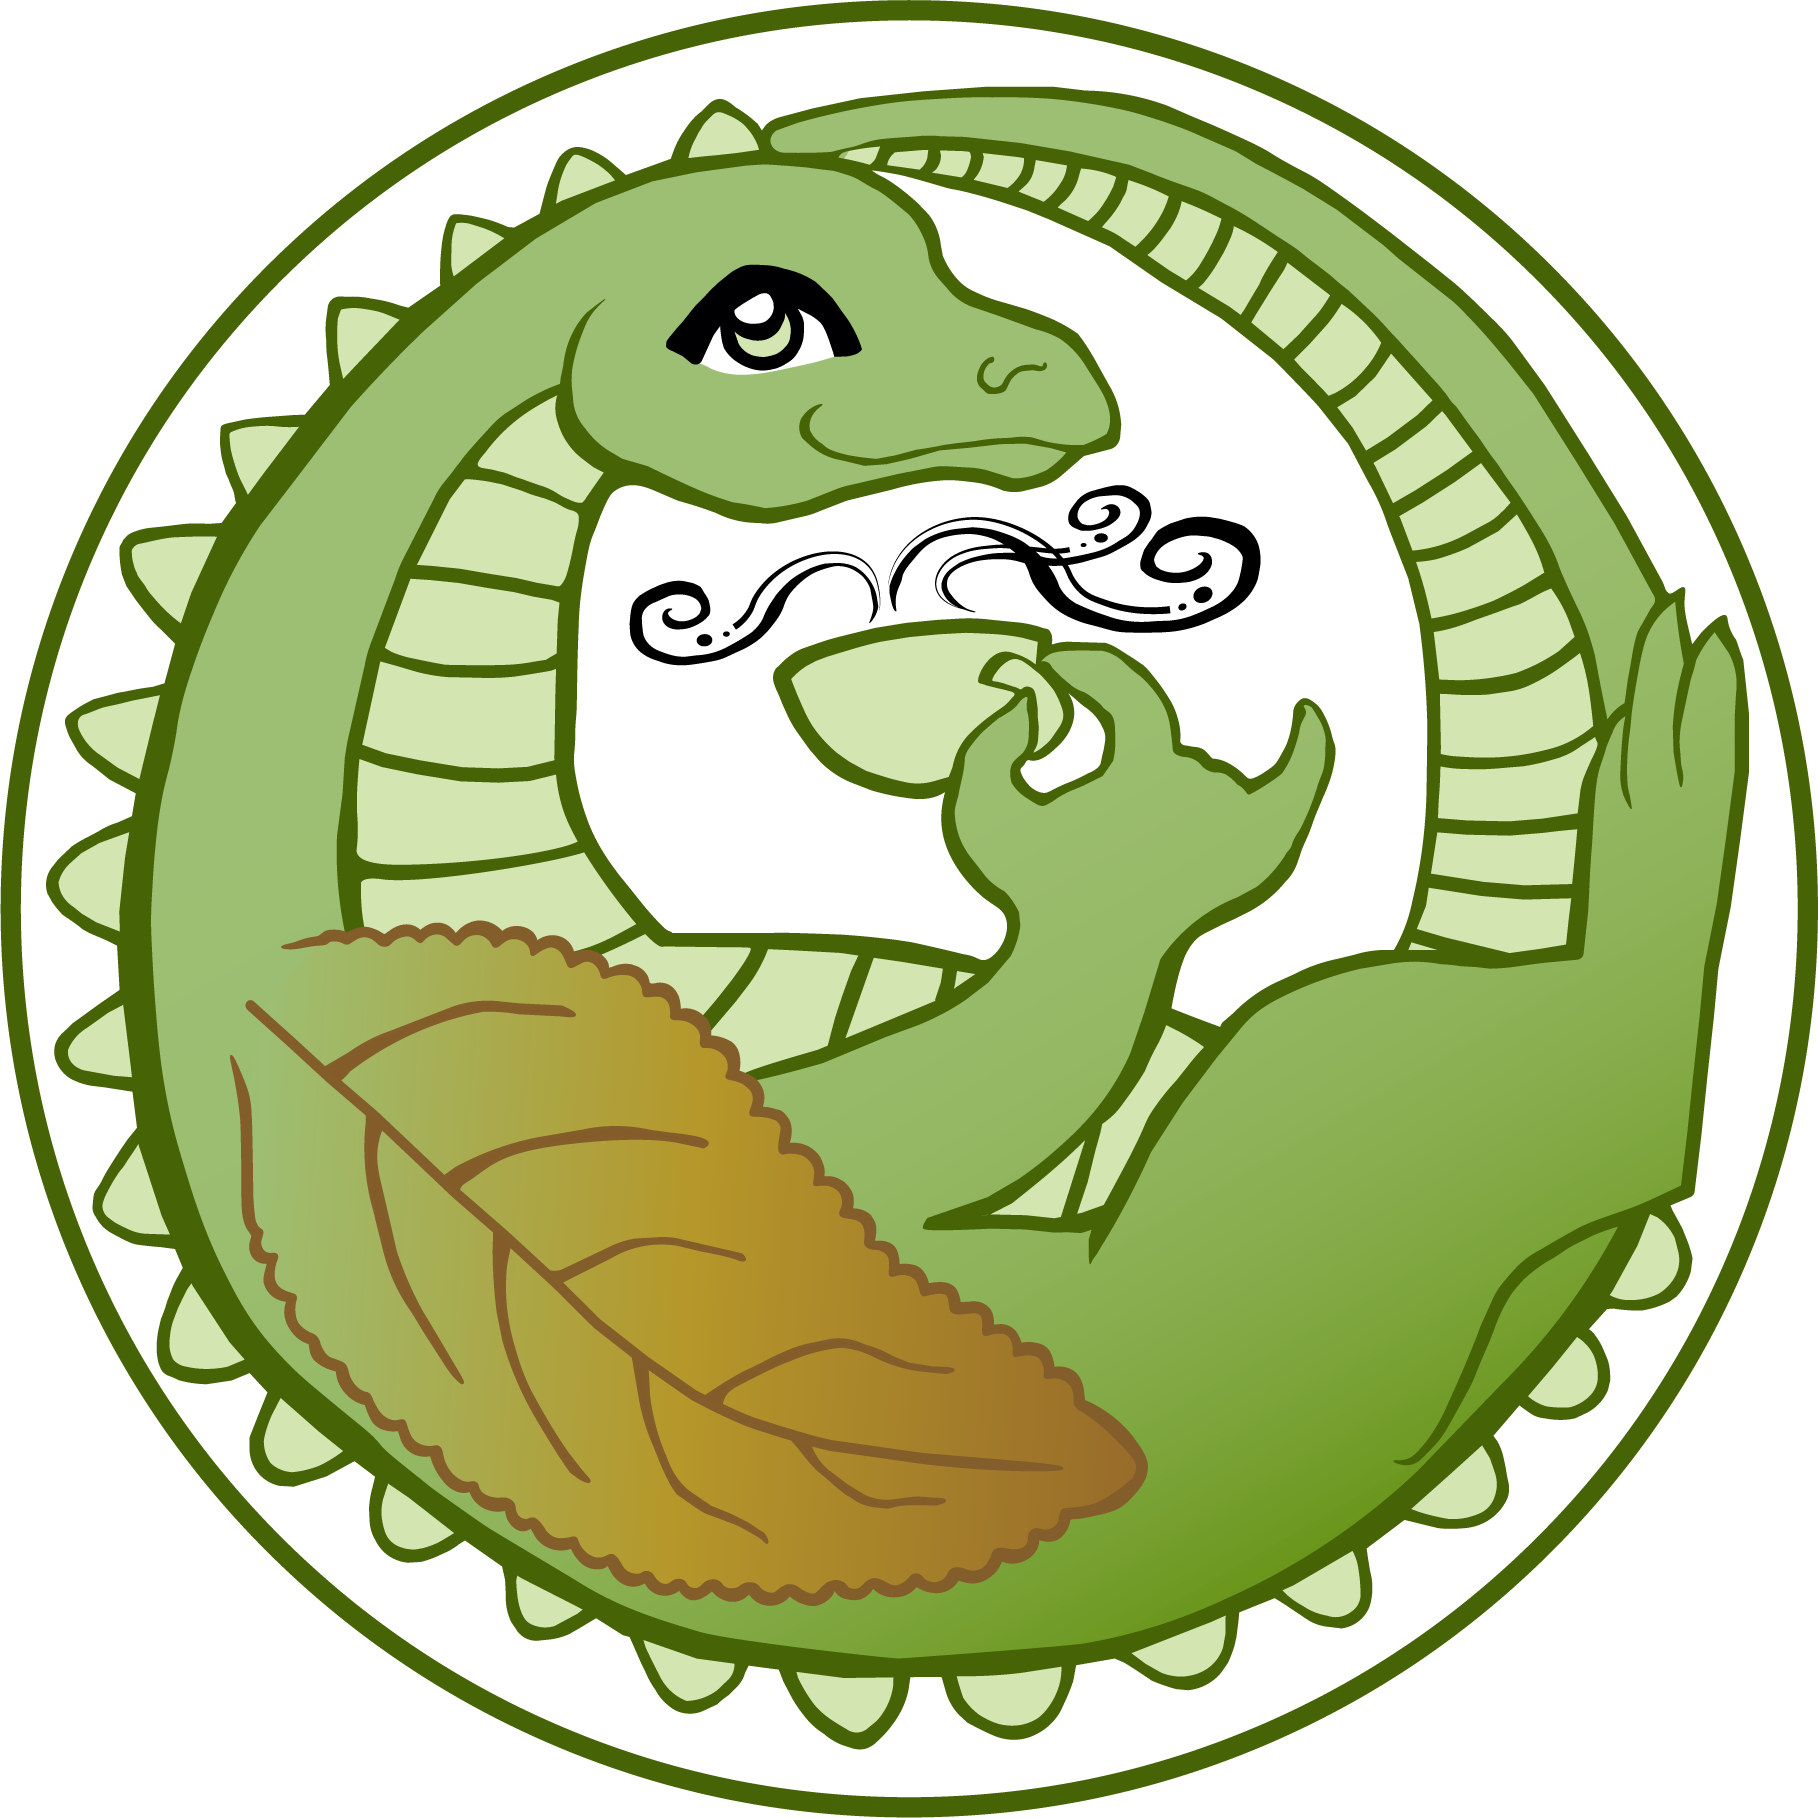 A green dragon with tea leaf wing, curled with tail over head and holding a cup of tea.